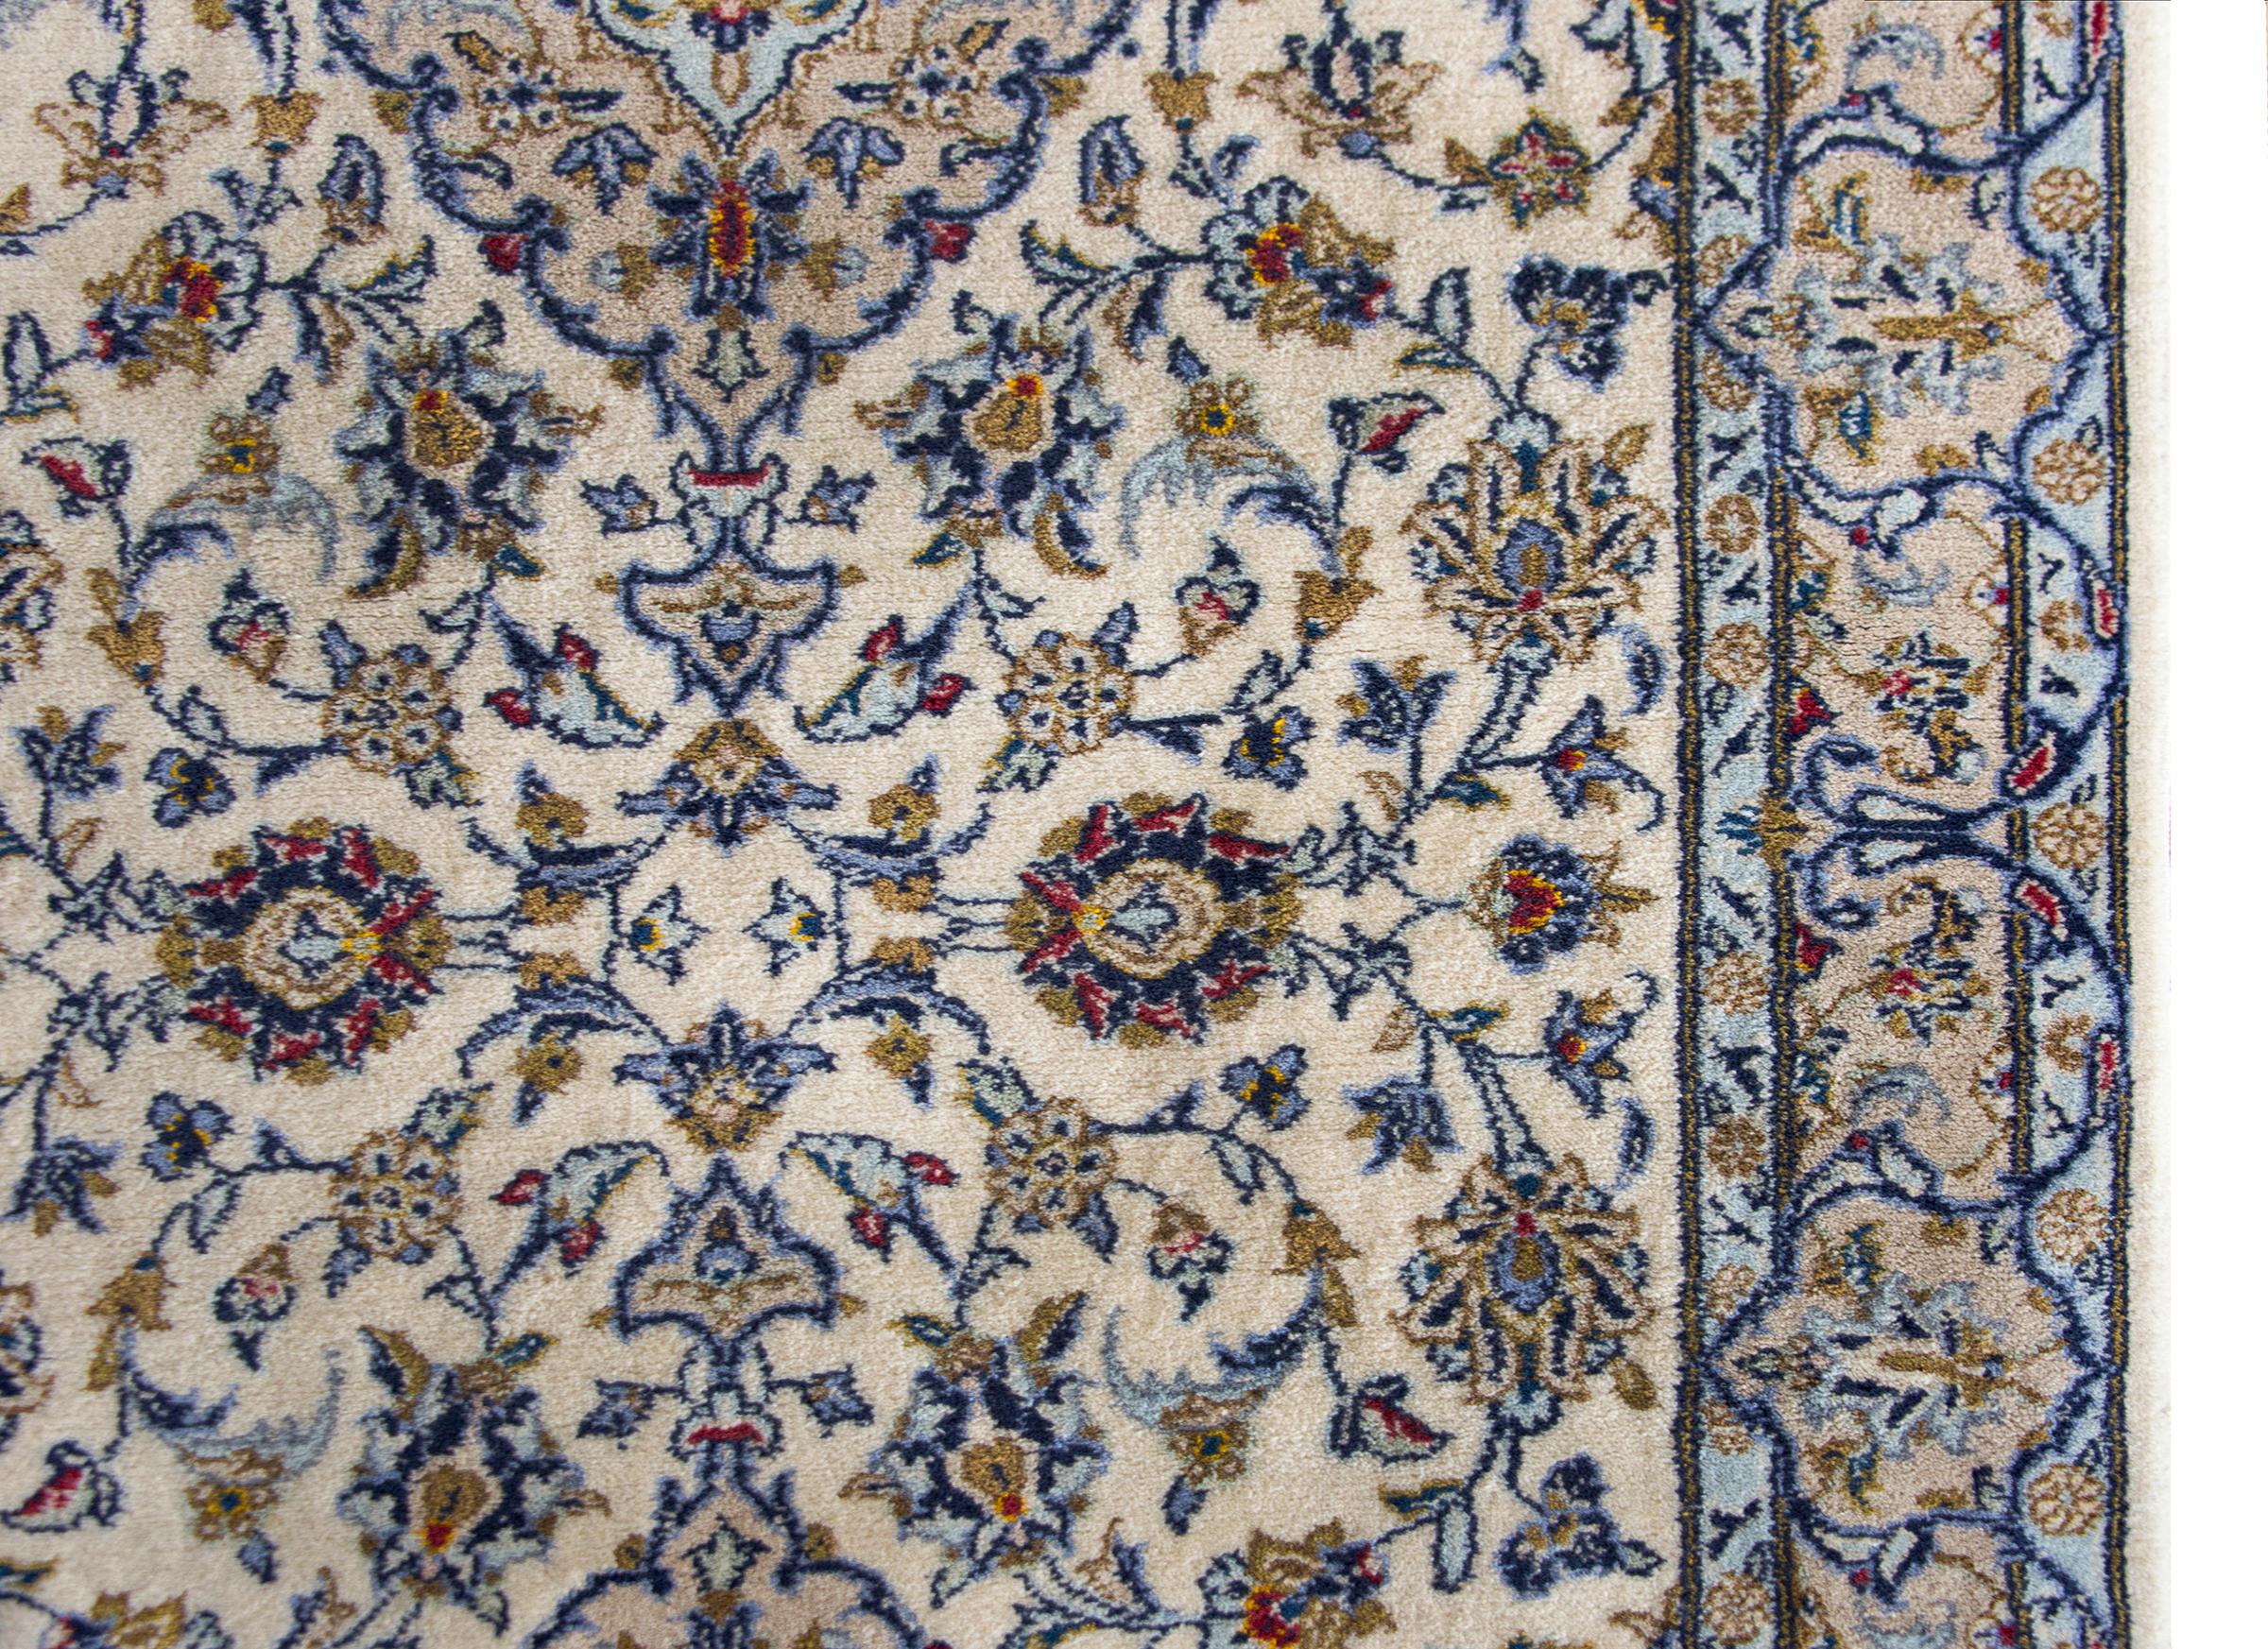 Wool Mid-20th Century Persian Kashan Runner For Sale